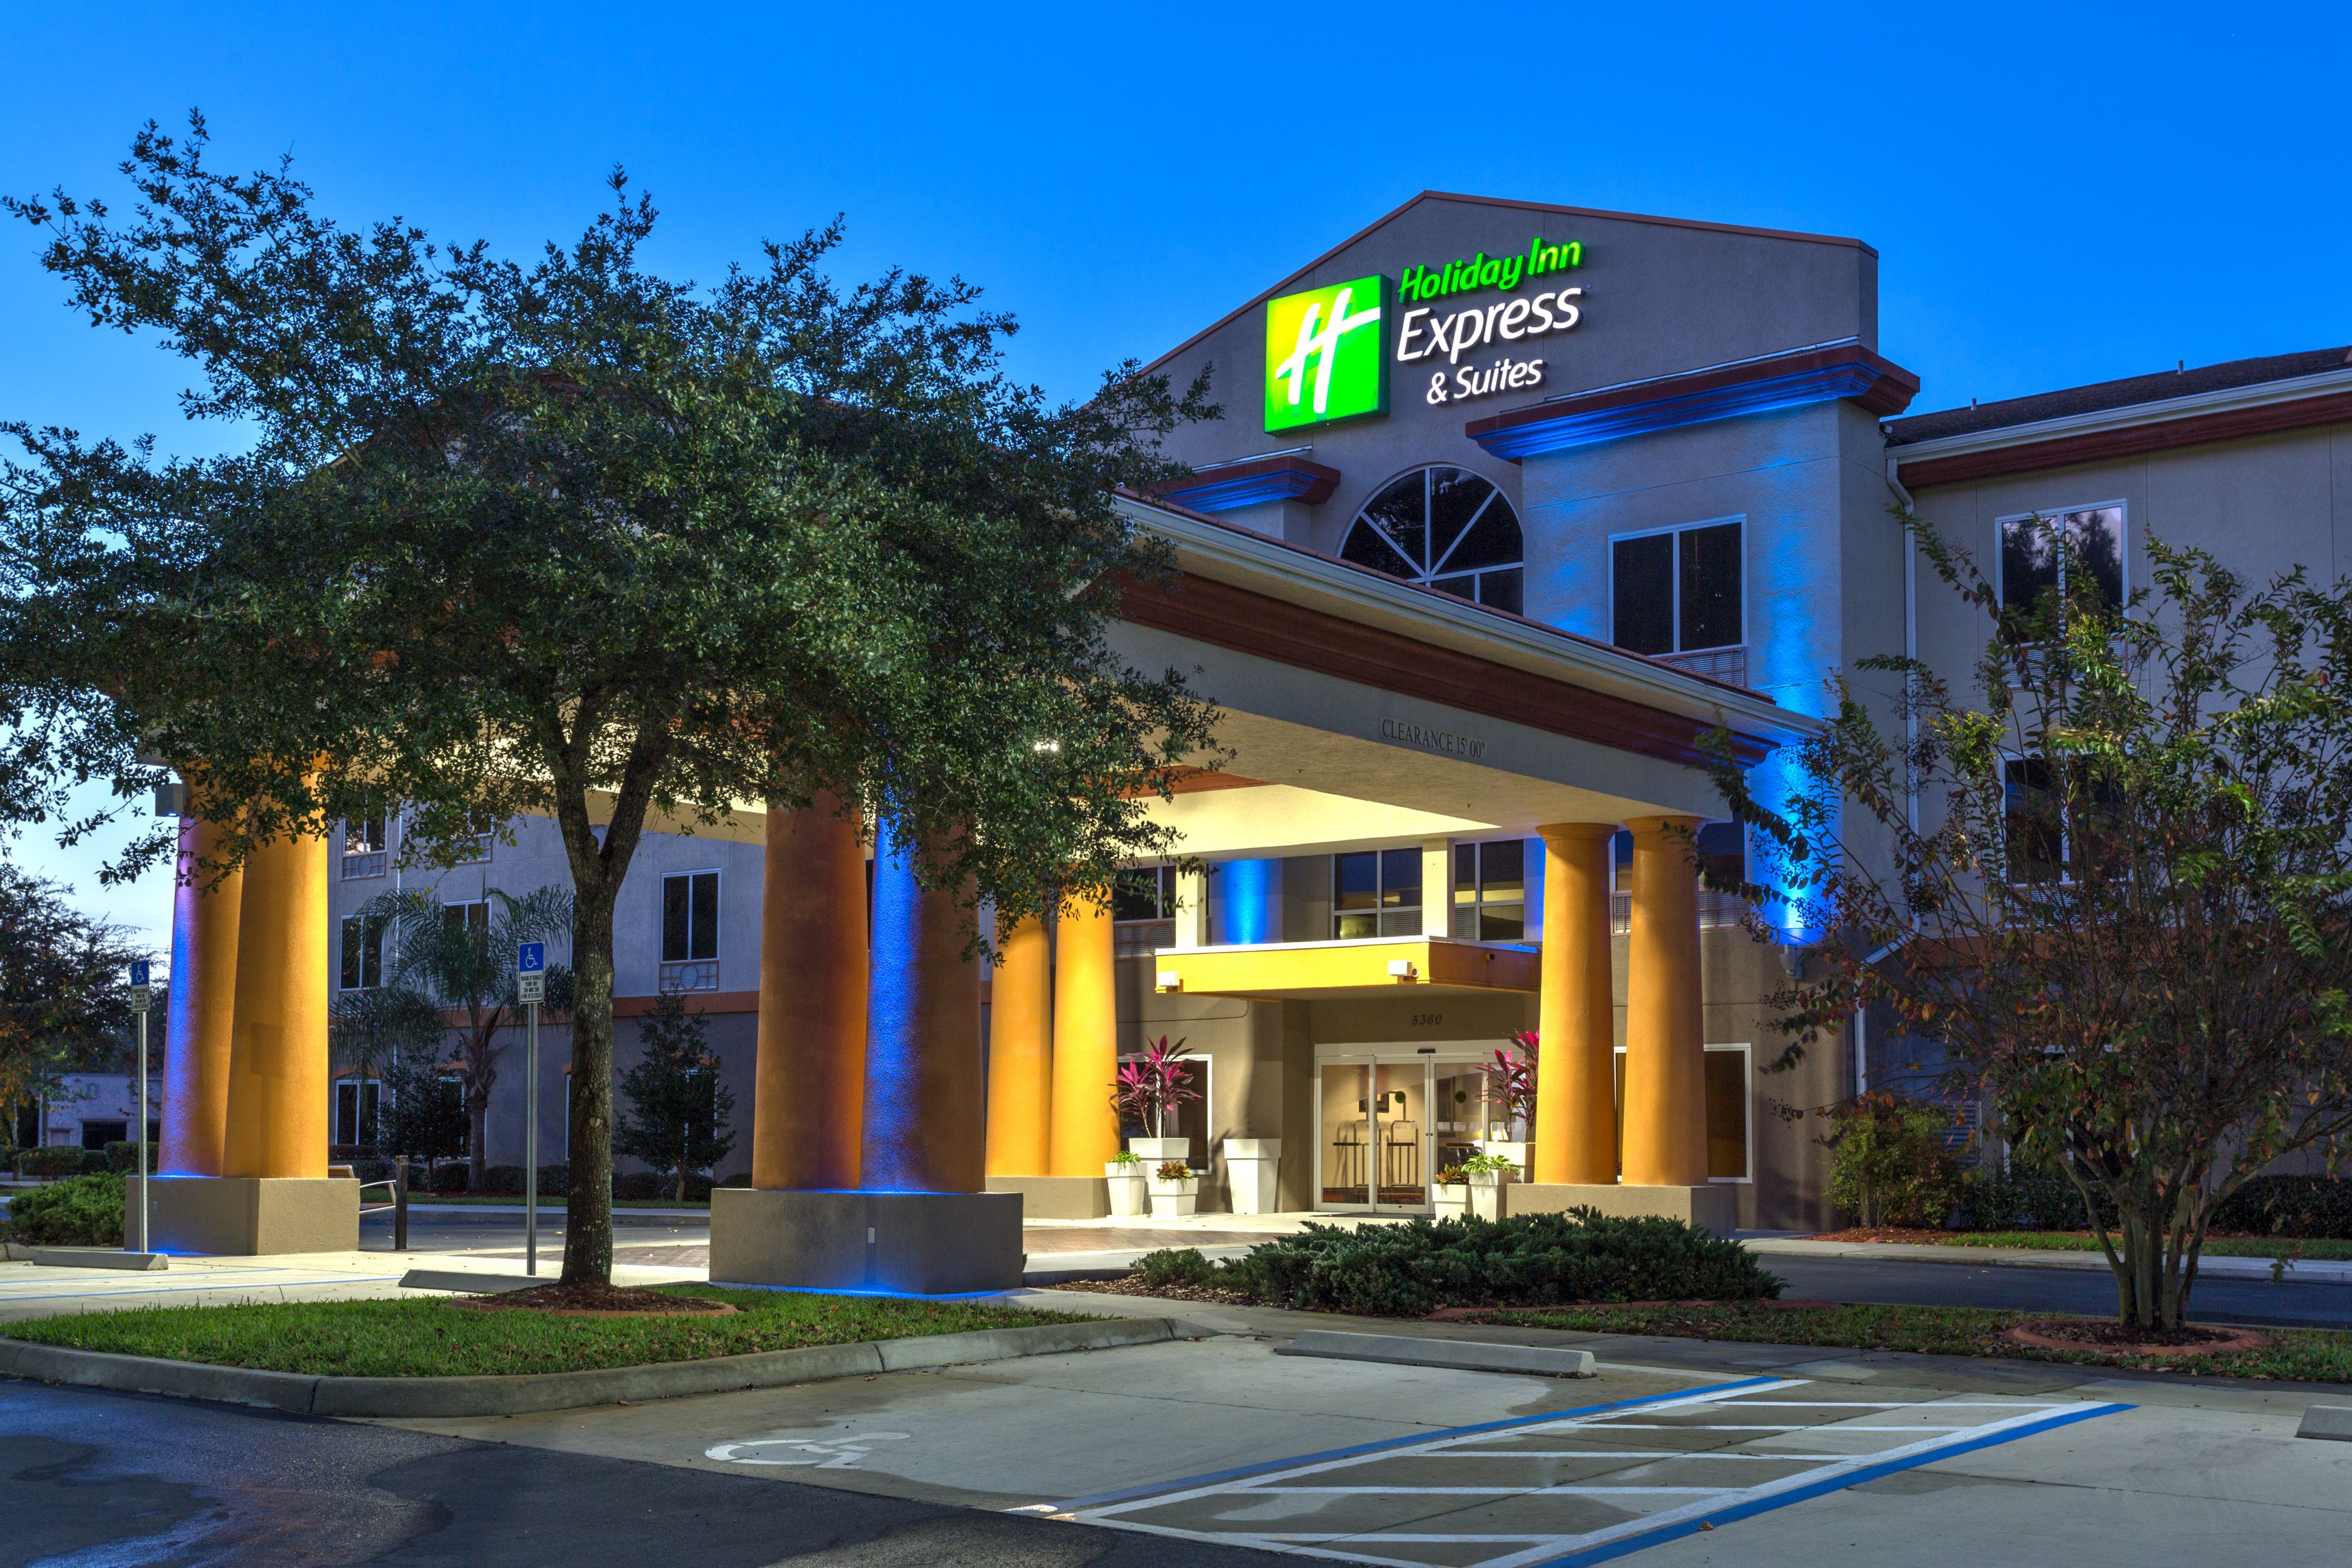 holiday-inn-express-and-suites-silver-springs-3862387463-original.jpg